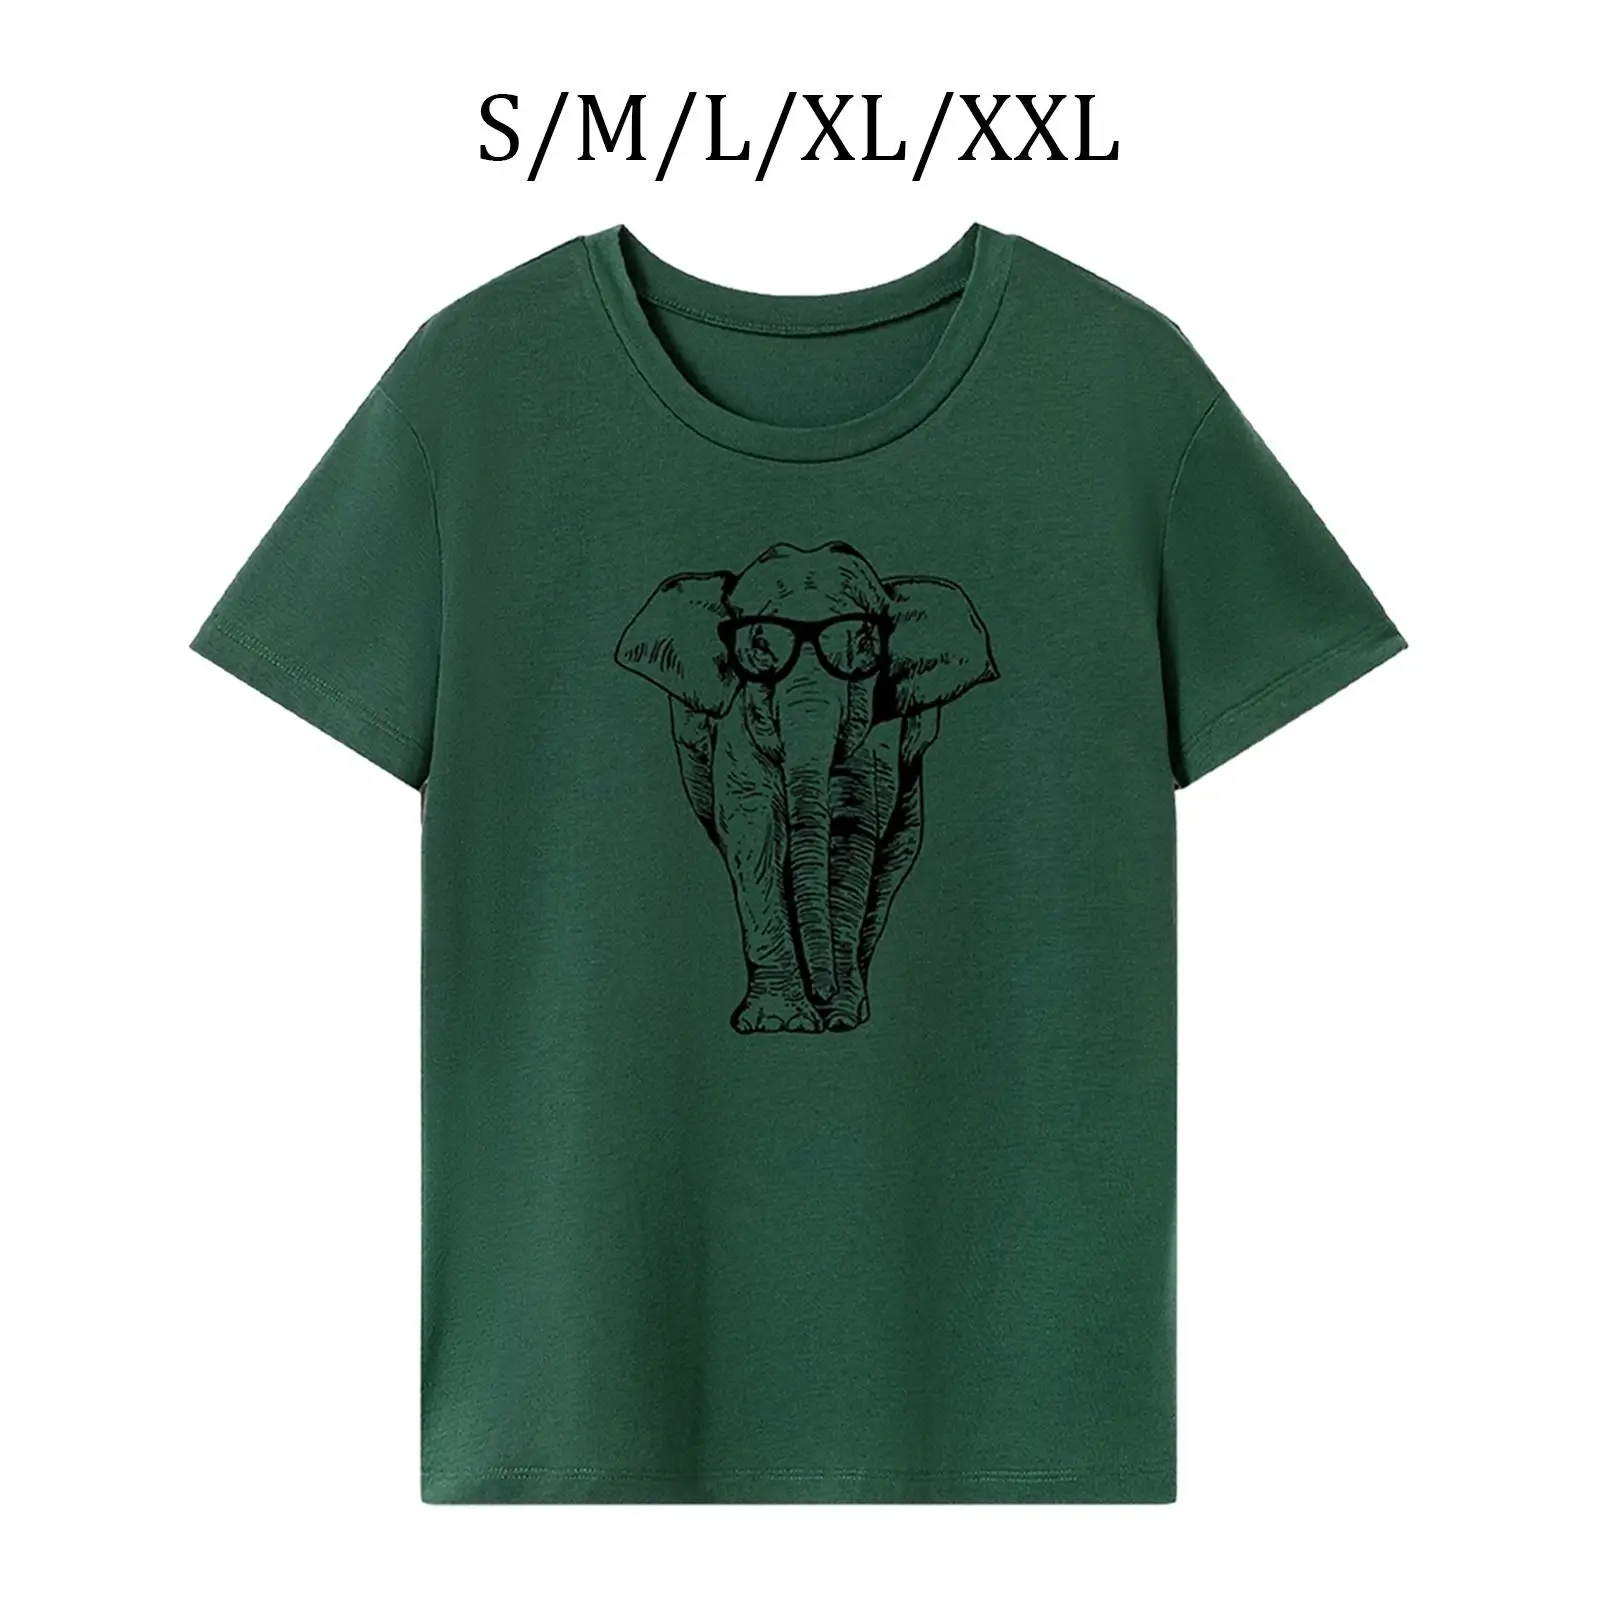 

Womens T Shirts Green Short Sleeve Tops Tee Casual Clothes Crew Neck Summer Tops for Shopping Walking Work Backpacking Commuting